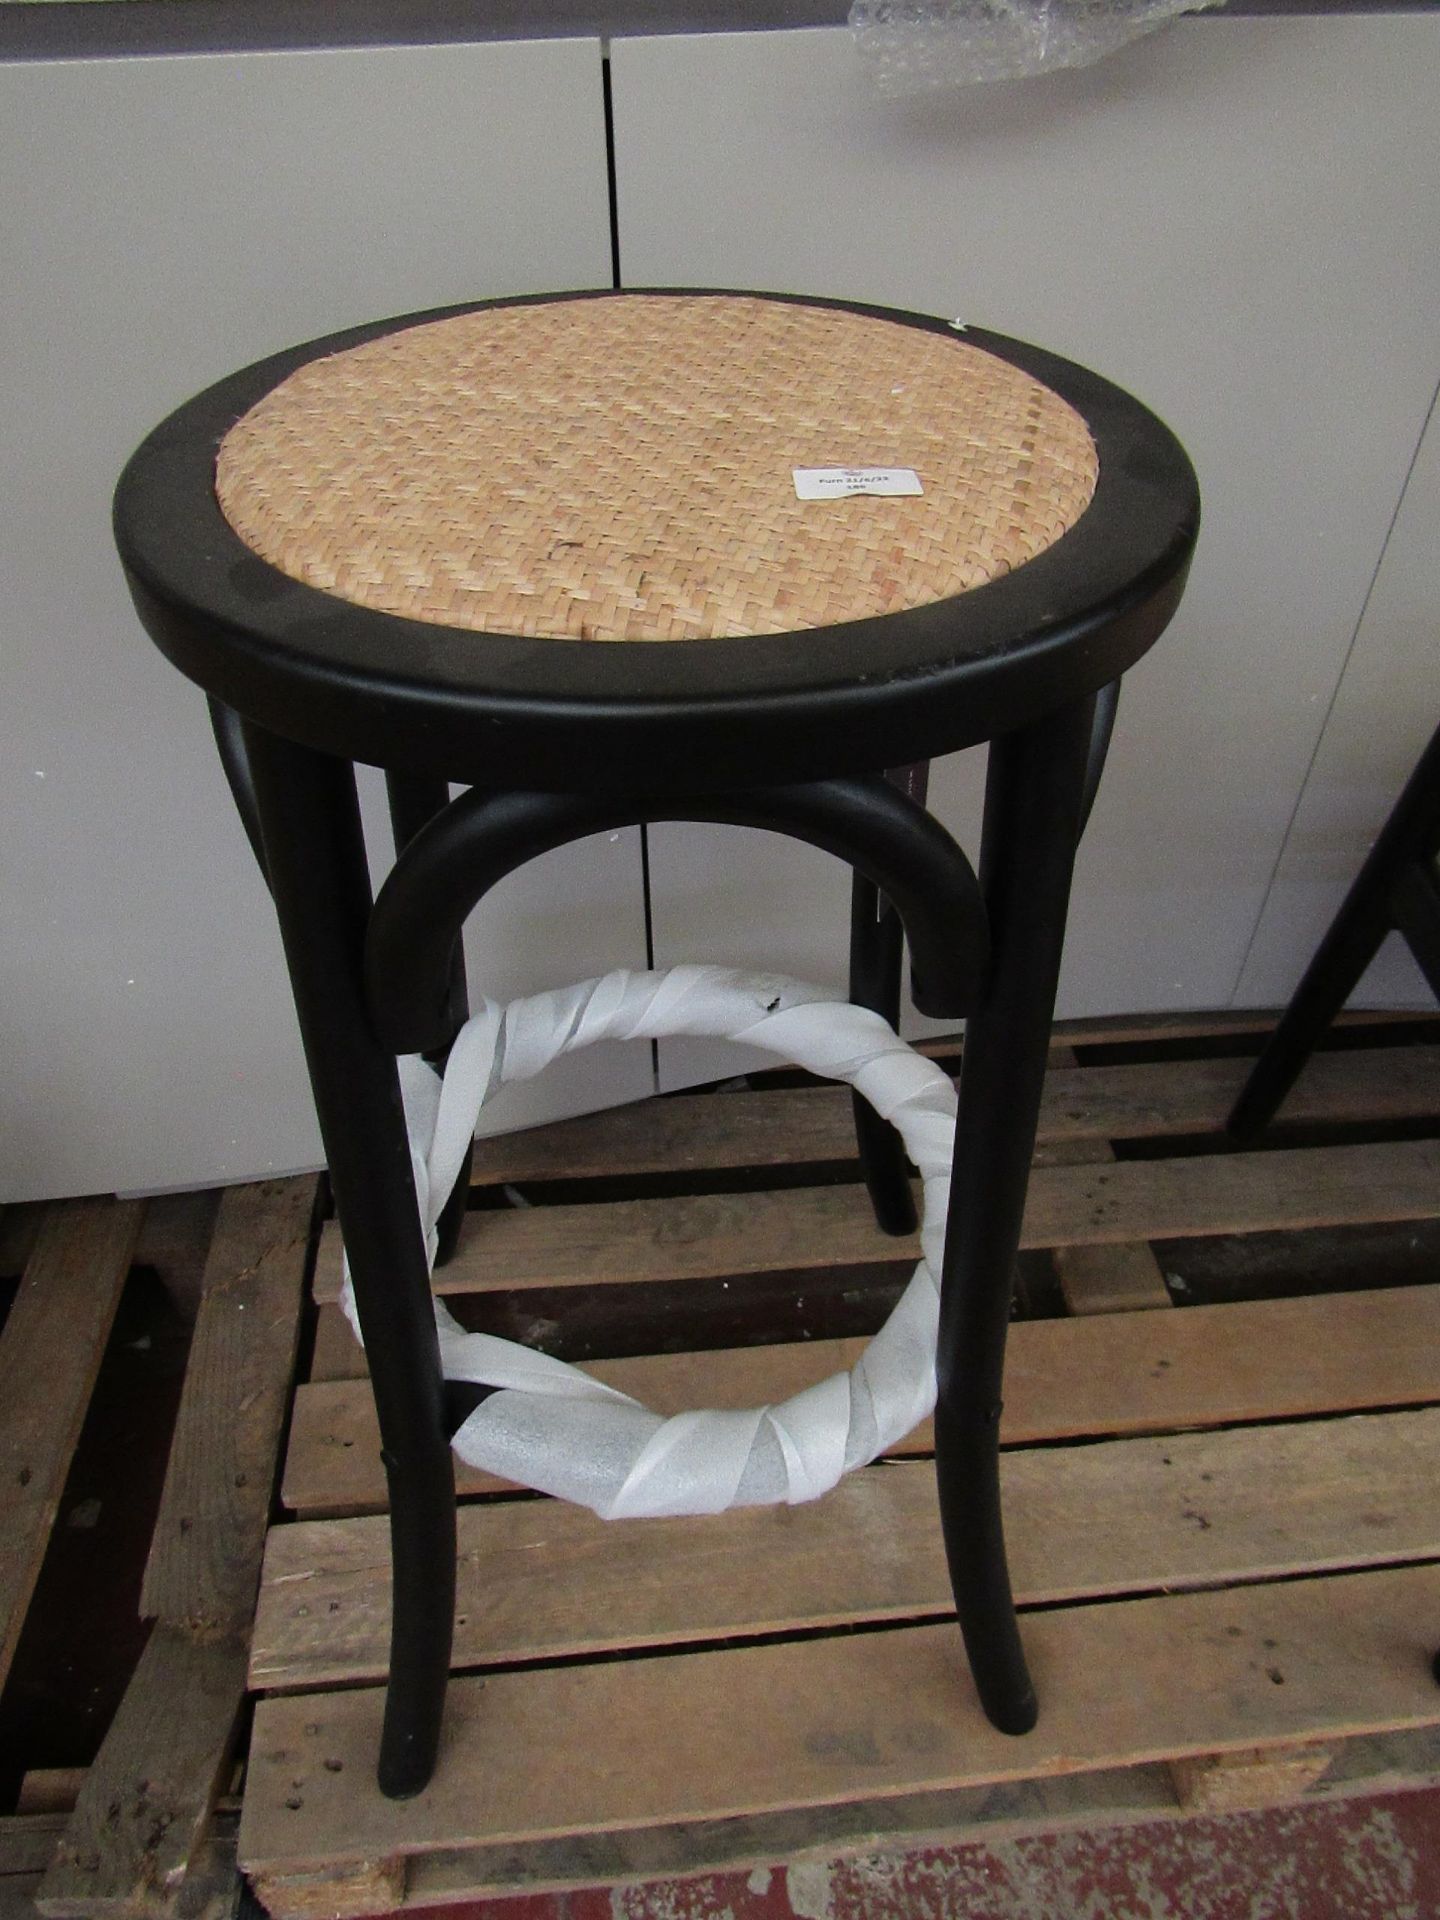 | 1X | COX & COX CORSO STOOL BLACK/RATTAN | FEW SCUFFS BUT OTHERWISE OKAY, VIEWING RECOMMENDED |